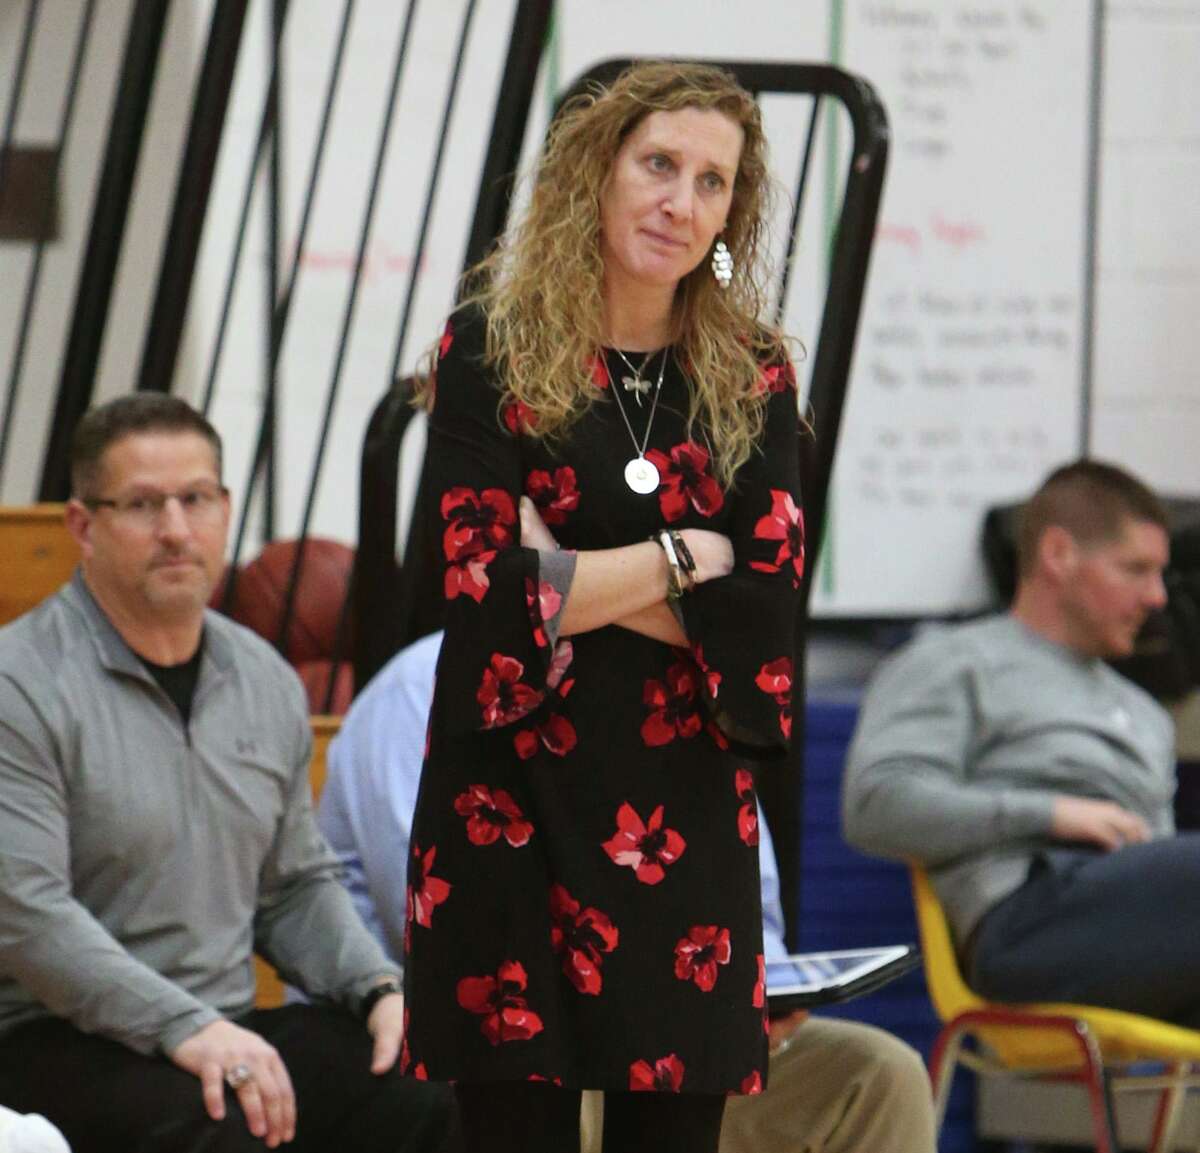 Cromwell High School girls varsity head coach Kelly Maher is stepping down to concentrate on her soon-to-be full-time athletic director duties.